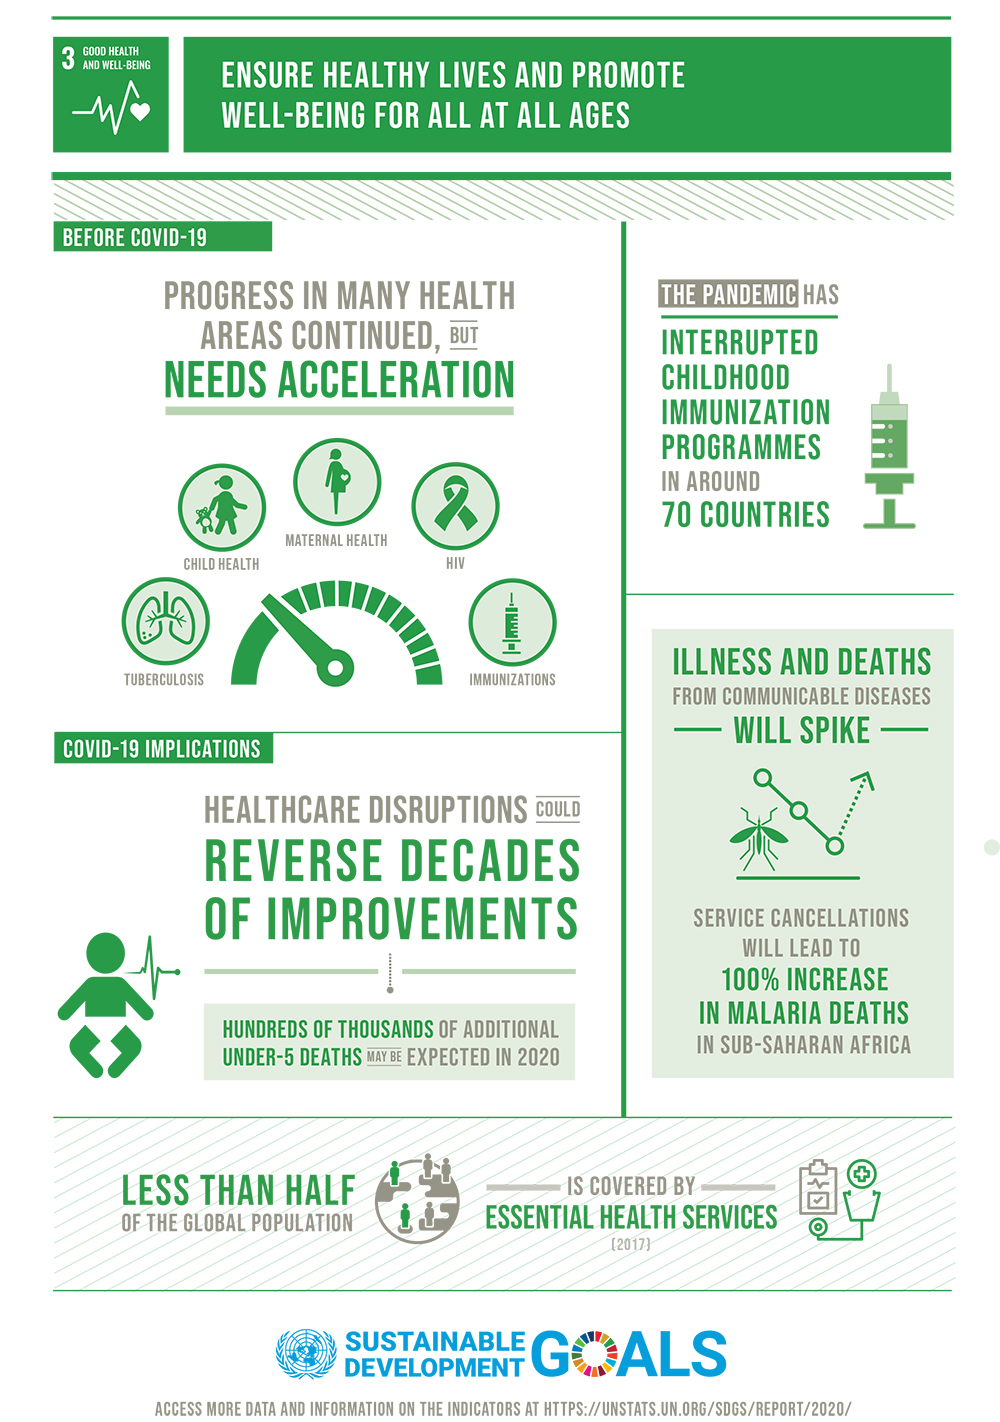 SDG-3 “Good Health and Well-Being” Explained